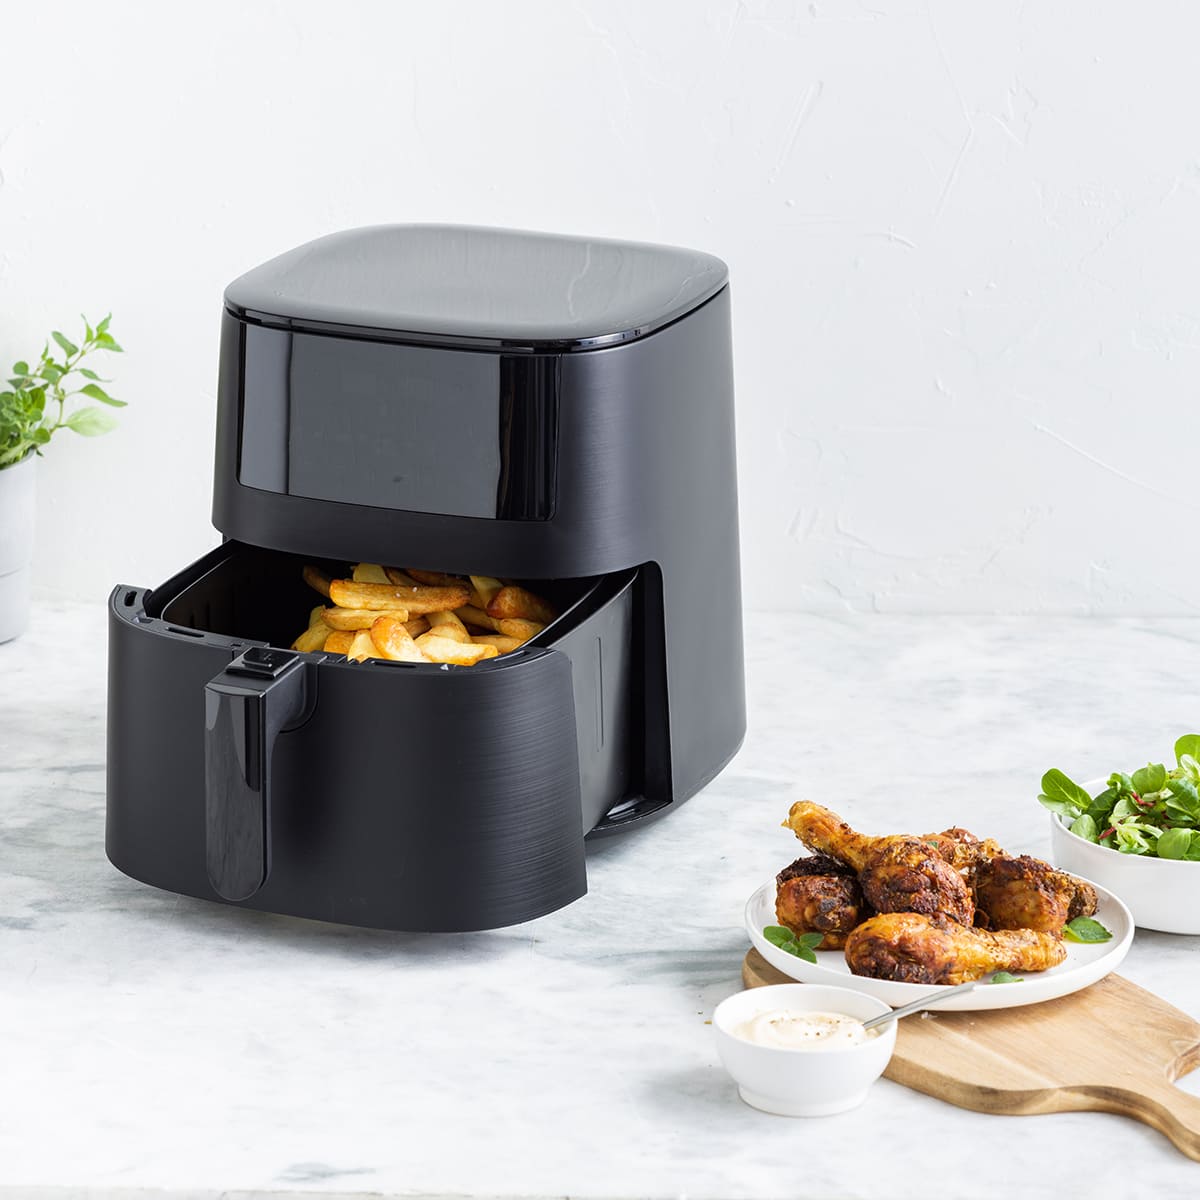 CC008230-001 - Air Fryer XL AIRFRYER - Product Image 1